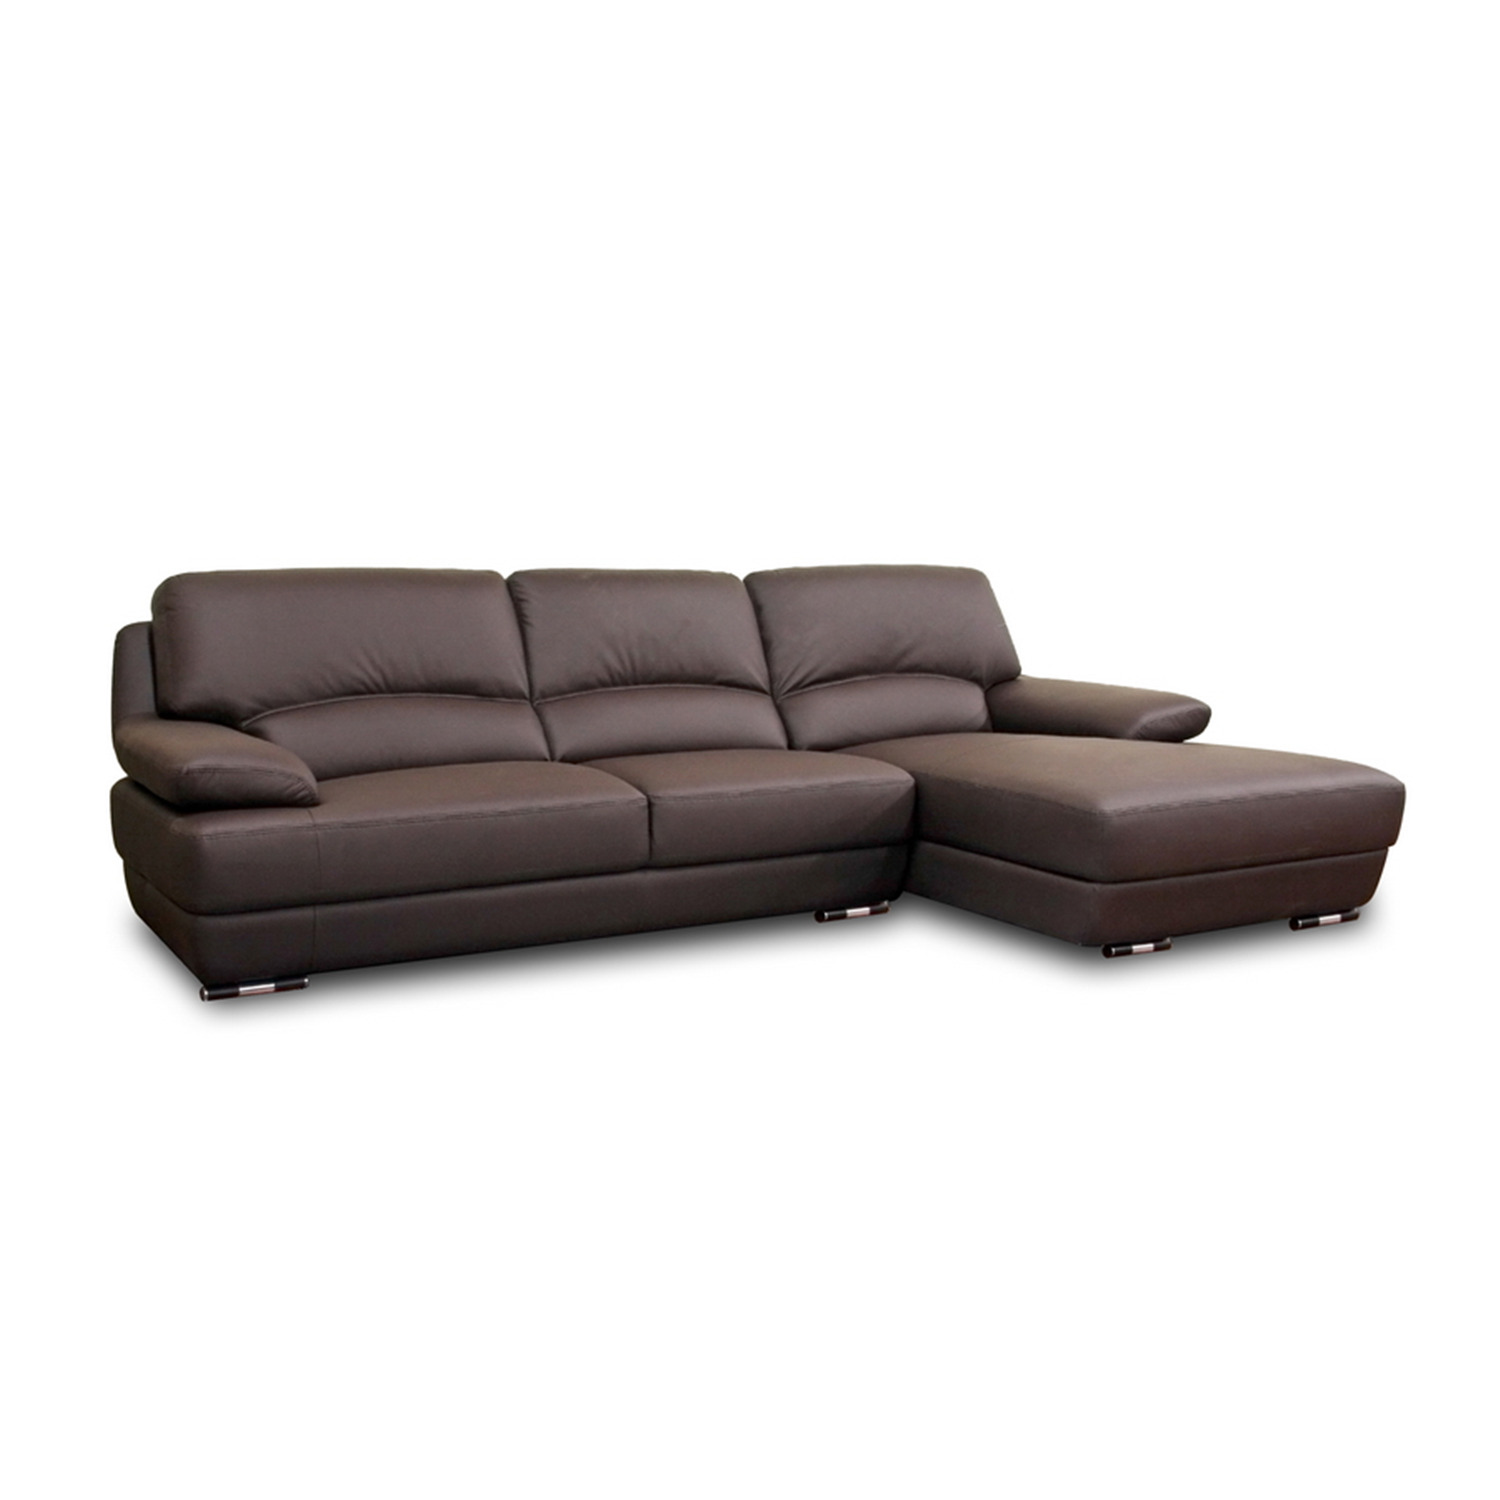 Wholesale Interiors Euclid Brown Leather Modern Sectional Sofa